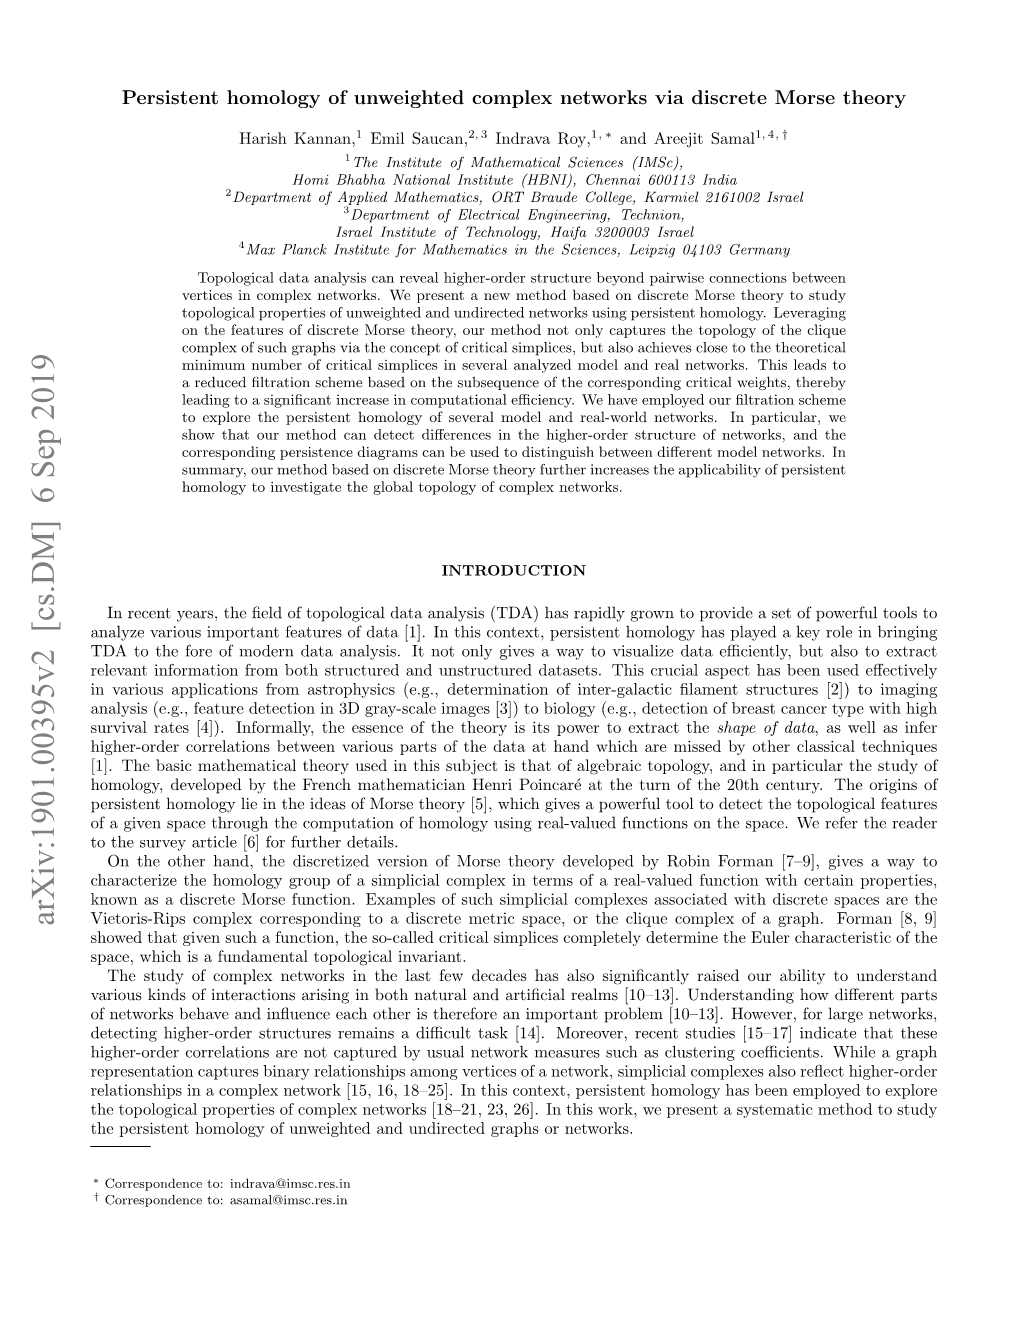 Persistent Homology of Unweighted Networks Via Discrete Morse Theory